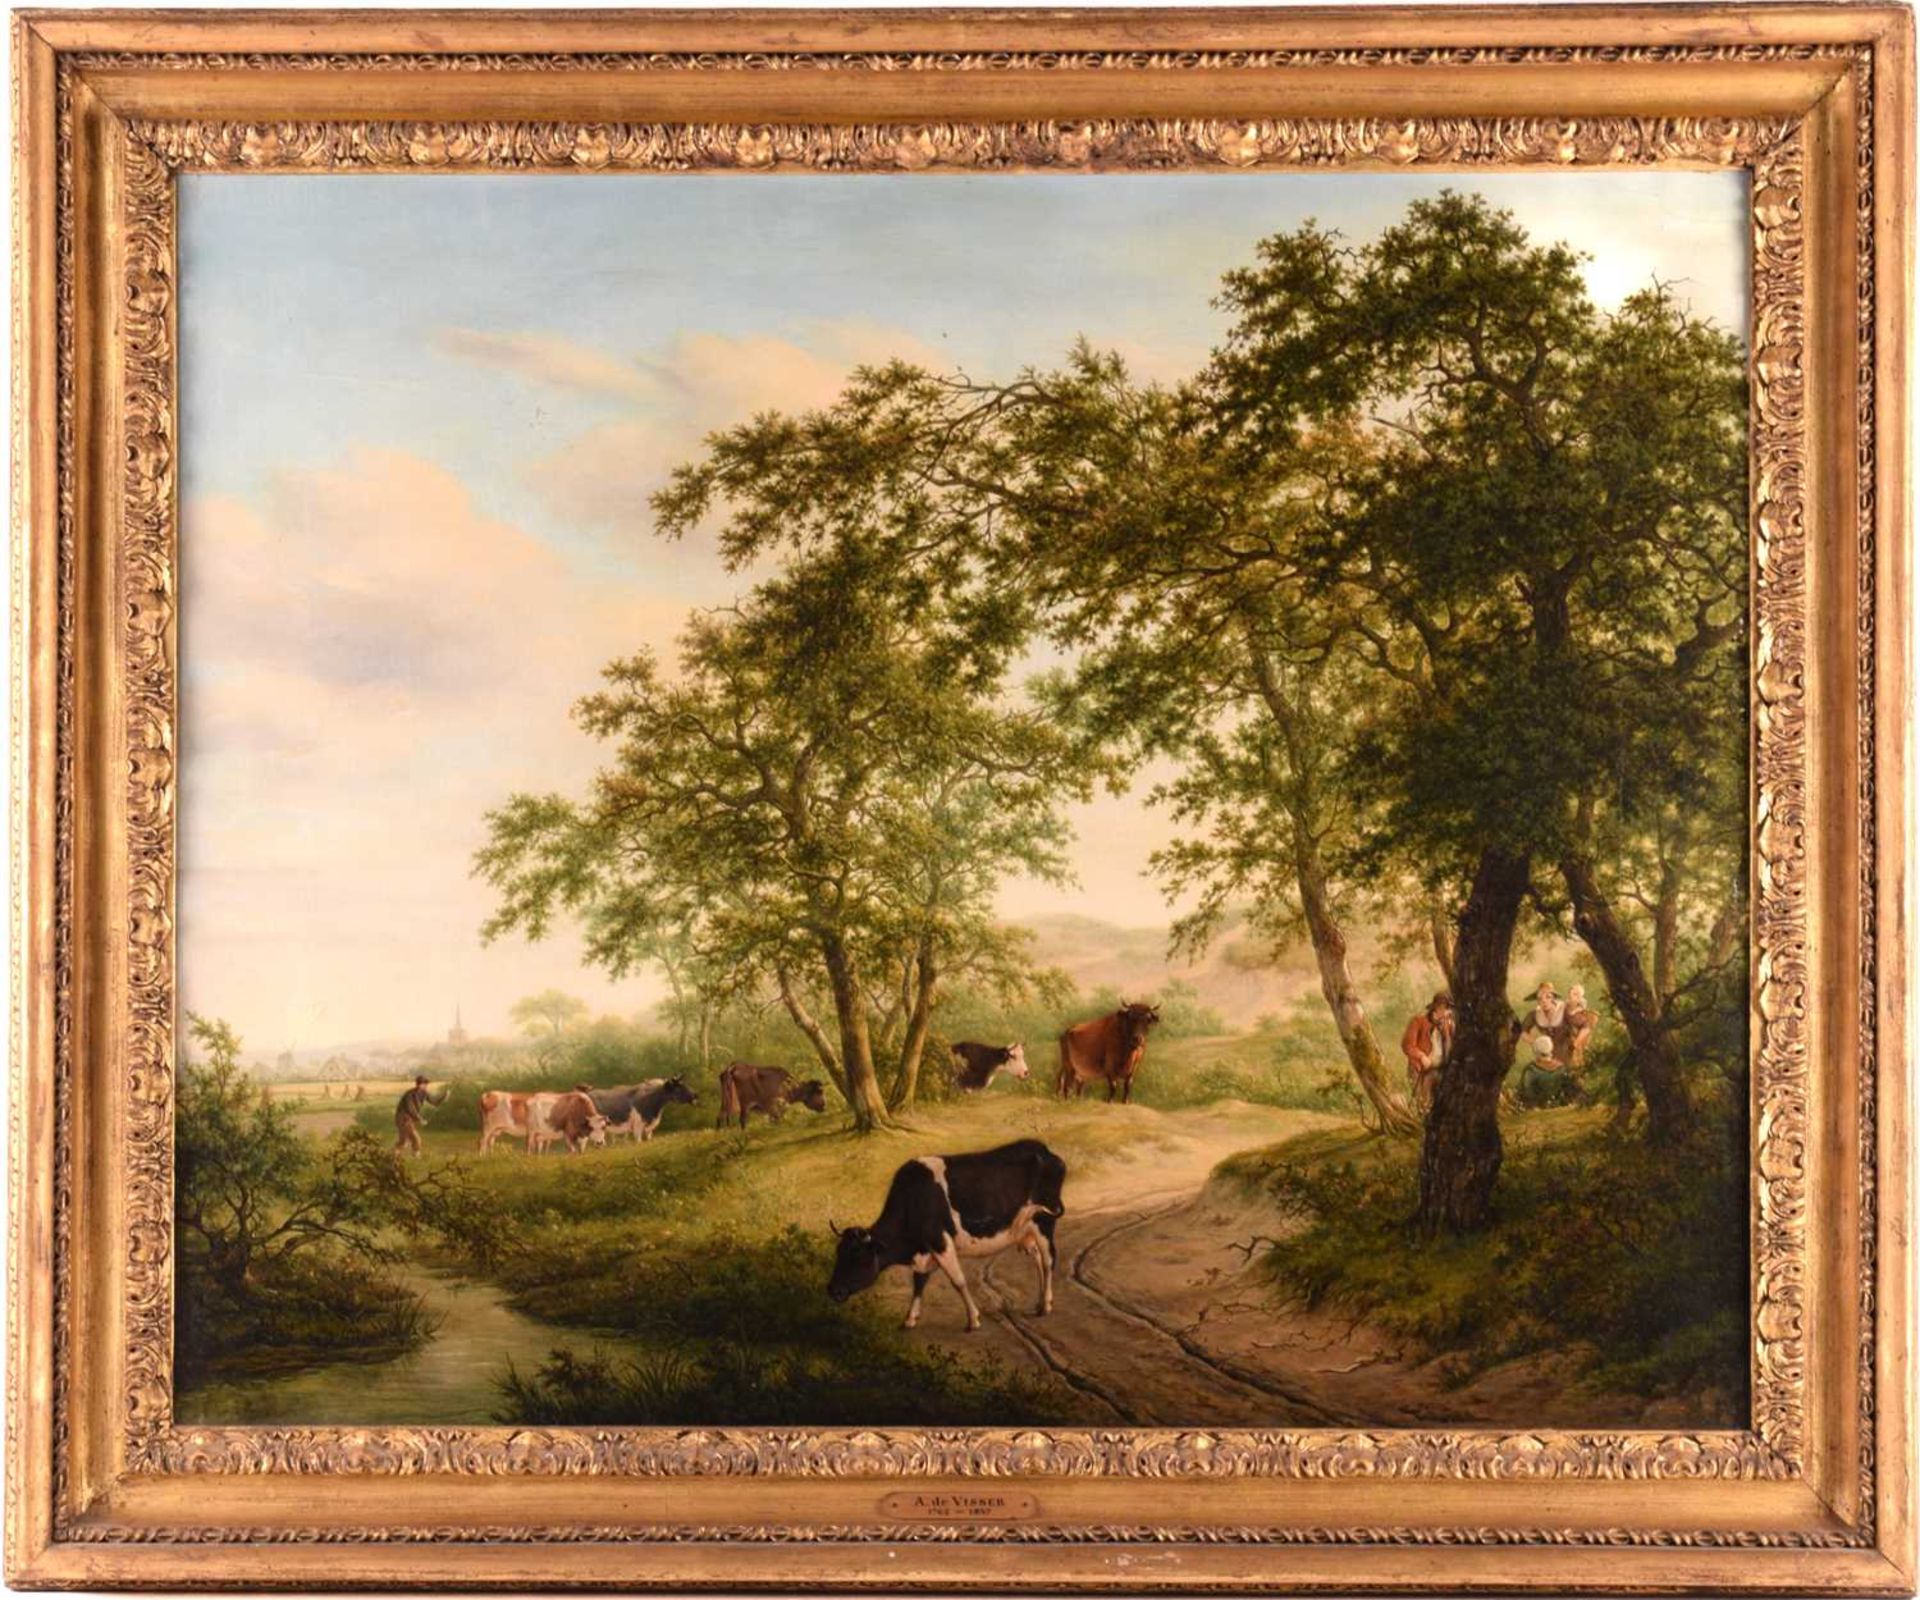 Adrianus de Visser (1762 - 1837), Cattle and figures on a riverside lane, signed and indistinctly